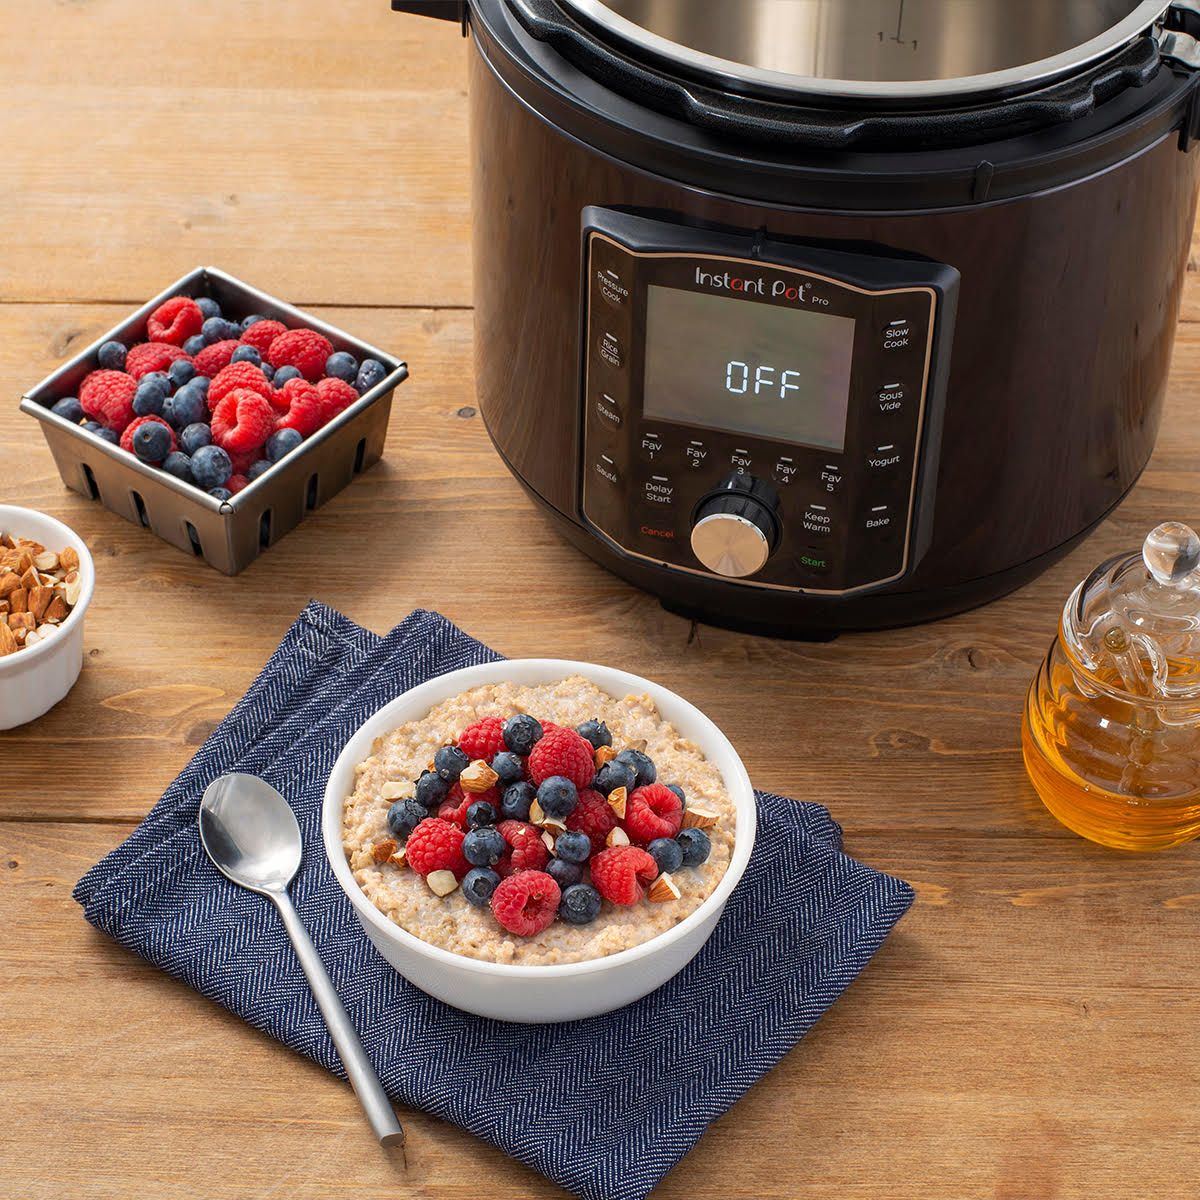 How To Use The Delay Start Function On The Instant Pot Pro Crisp